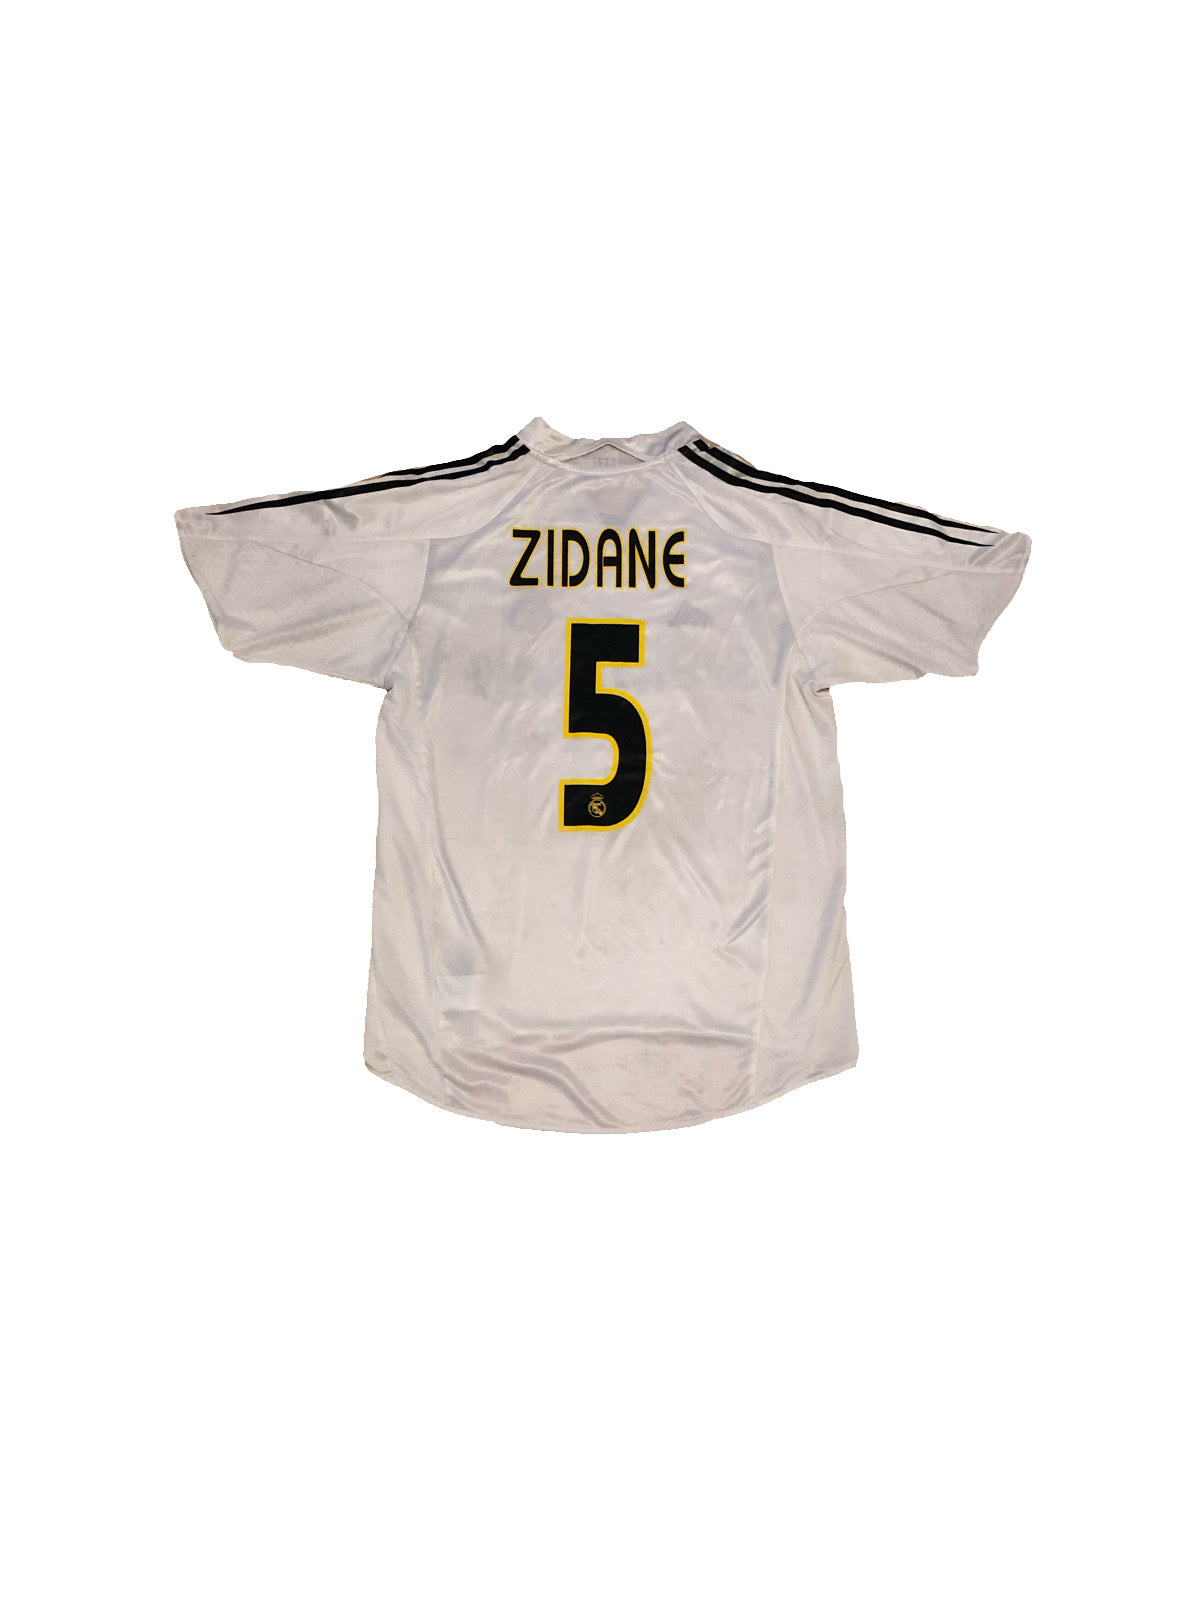 Real Madrid 2004/05 Player Issue Home Shirt #5 Zidane (Great)